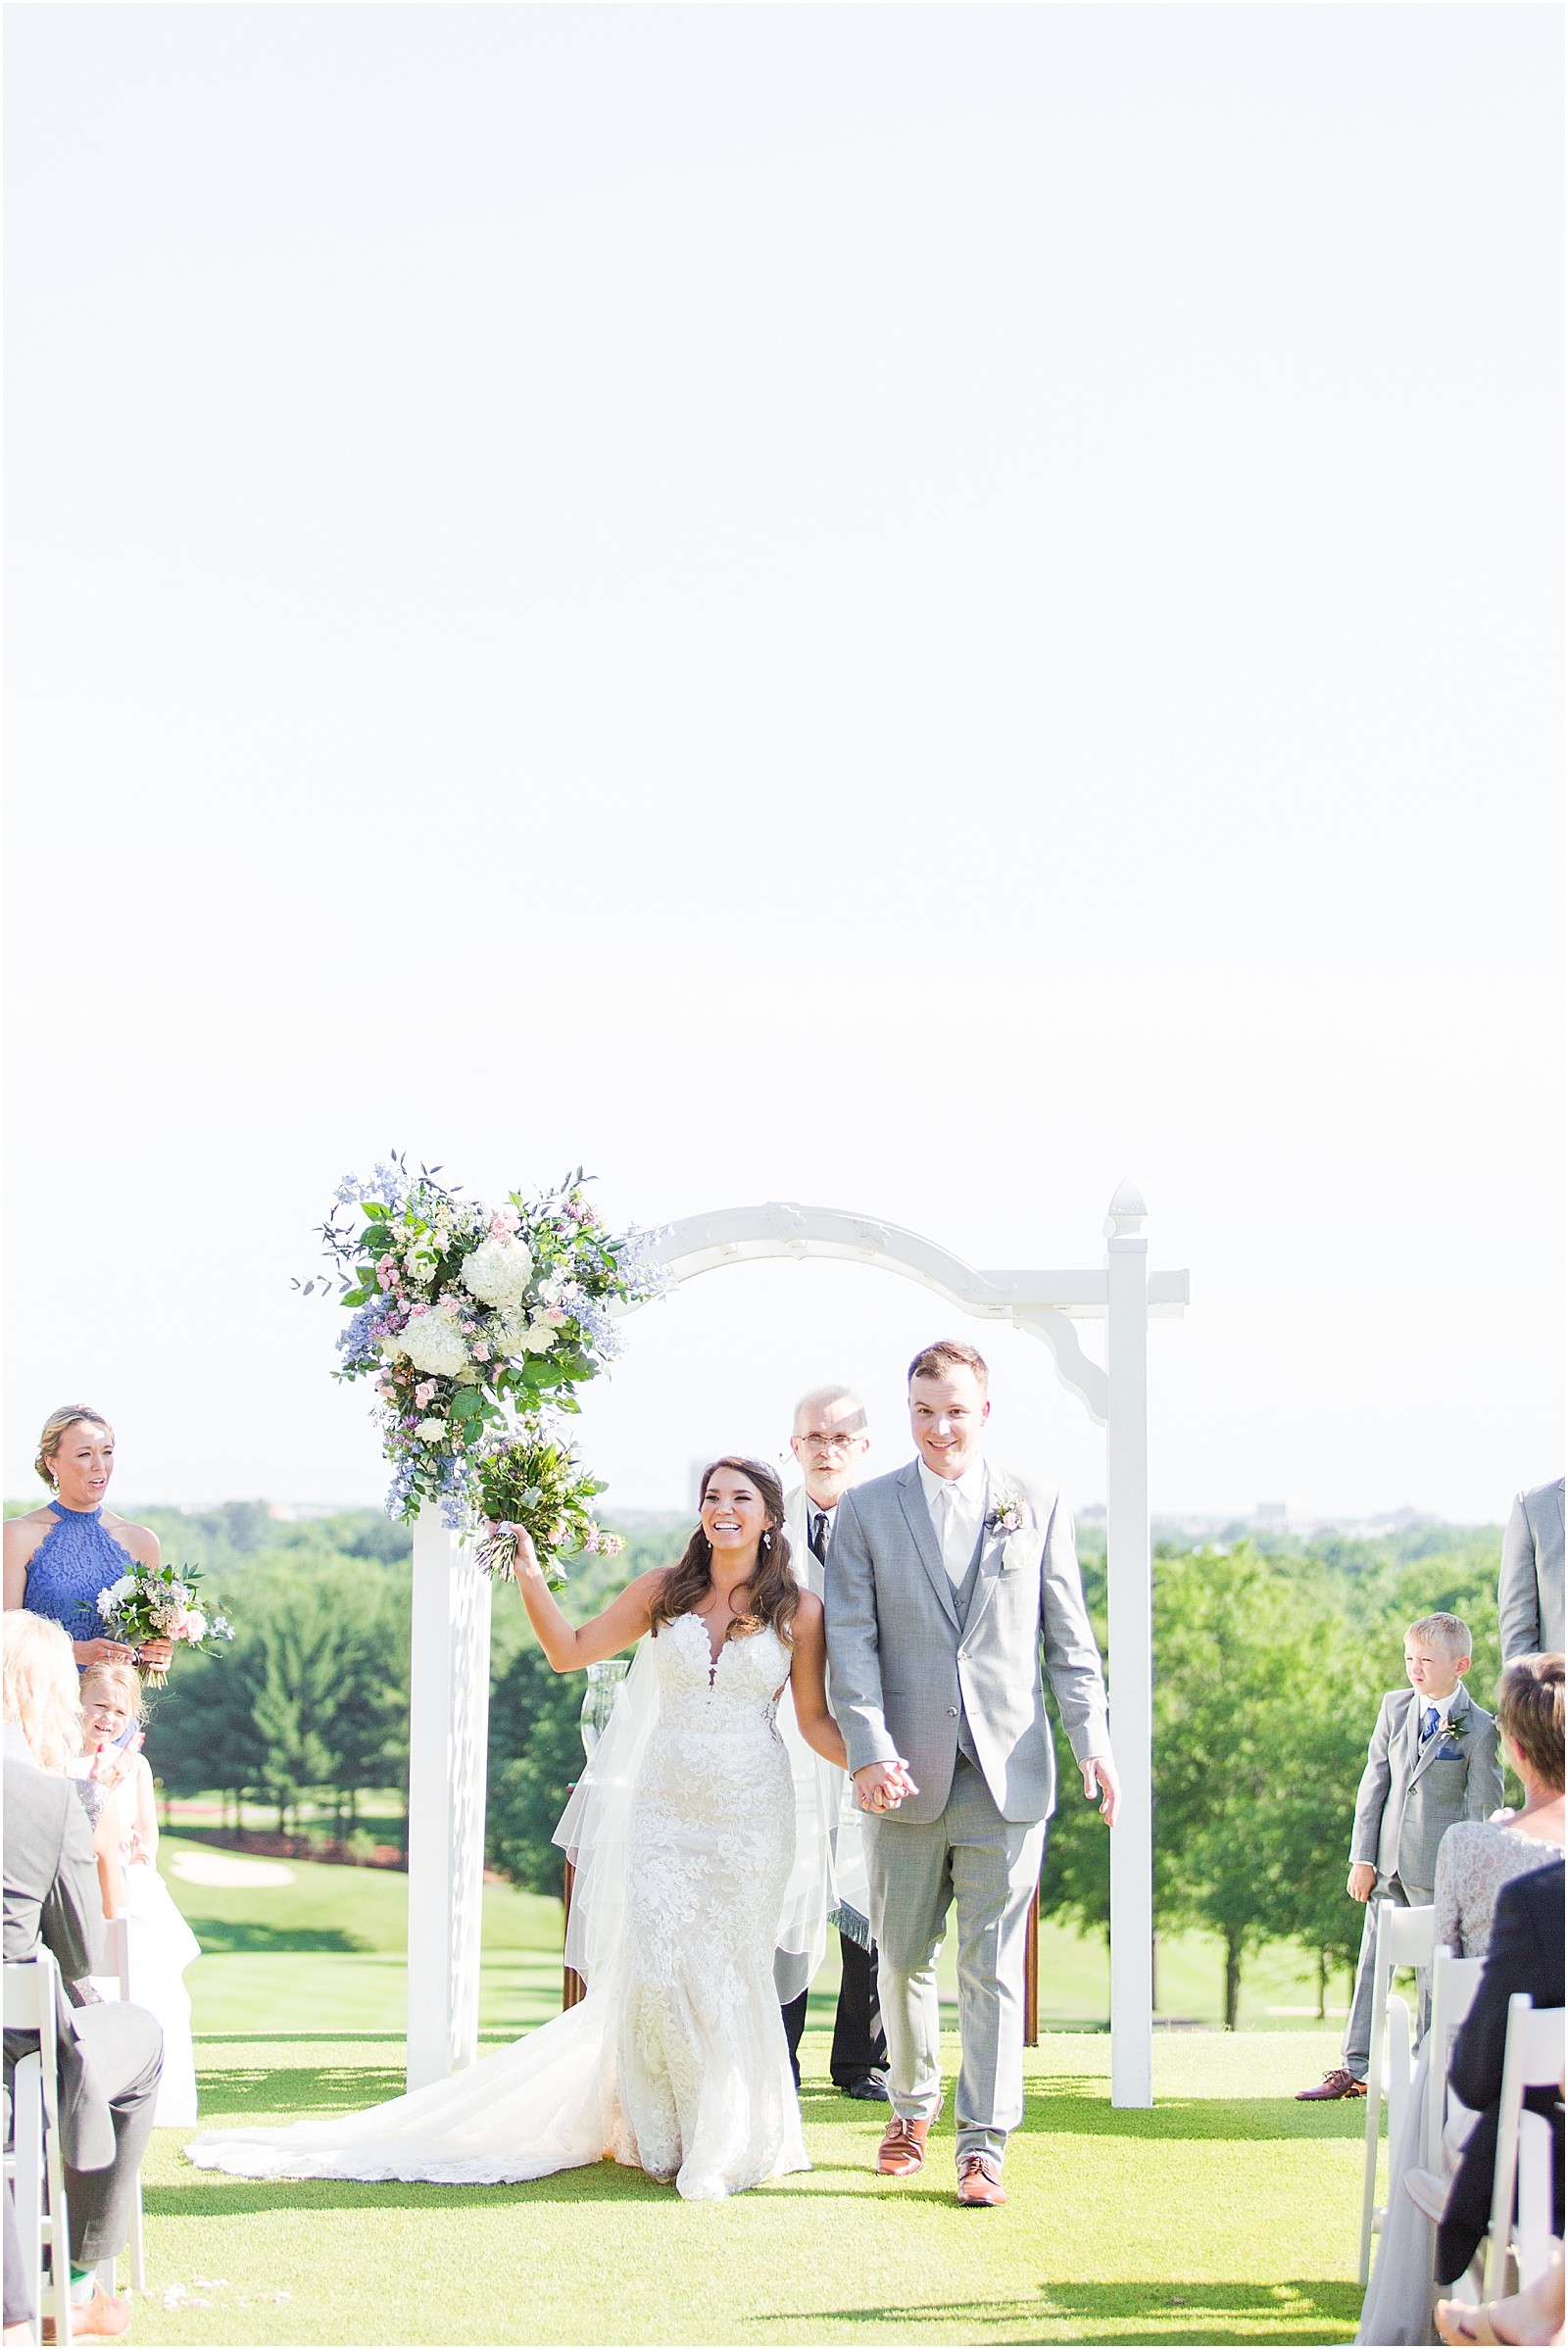 An Evansville County Club Wedding | Abby and Stratton 102.jpg